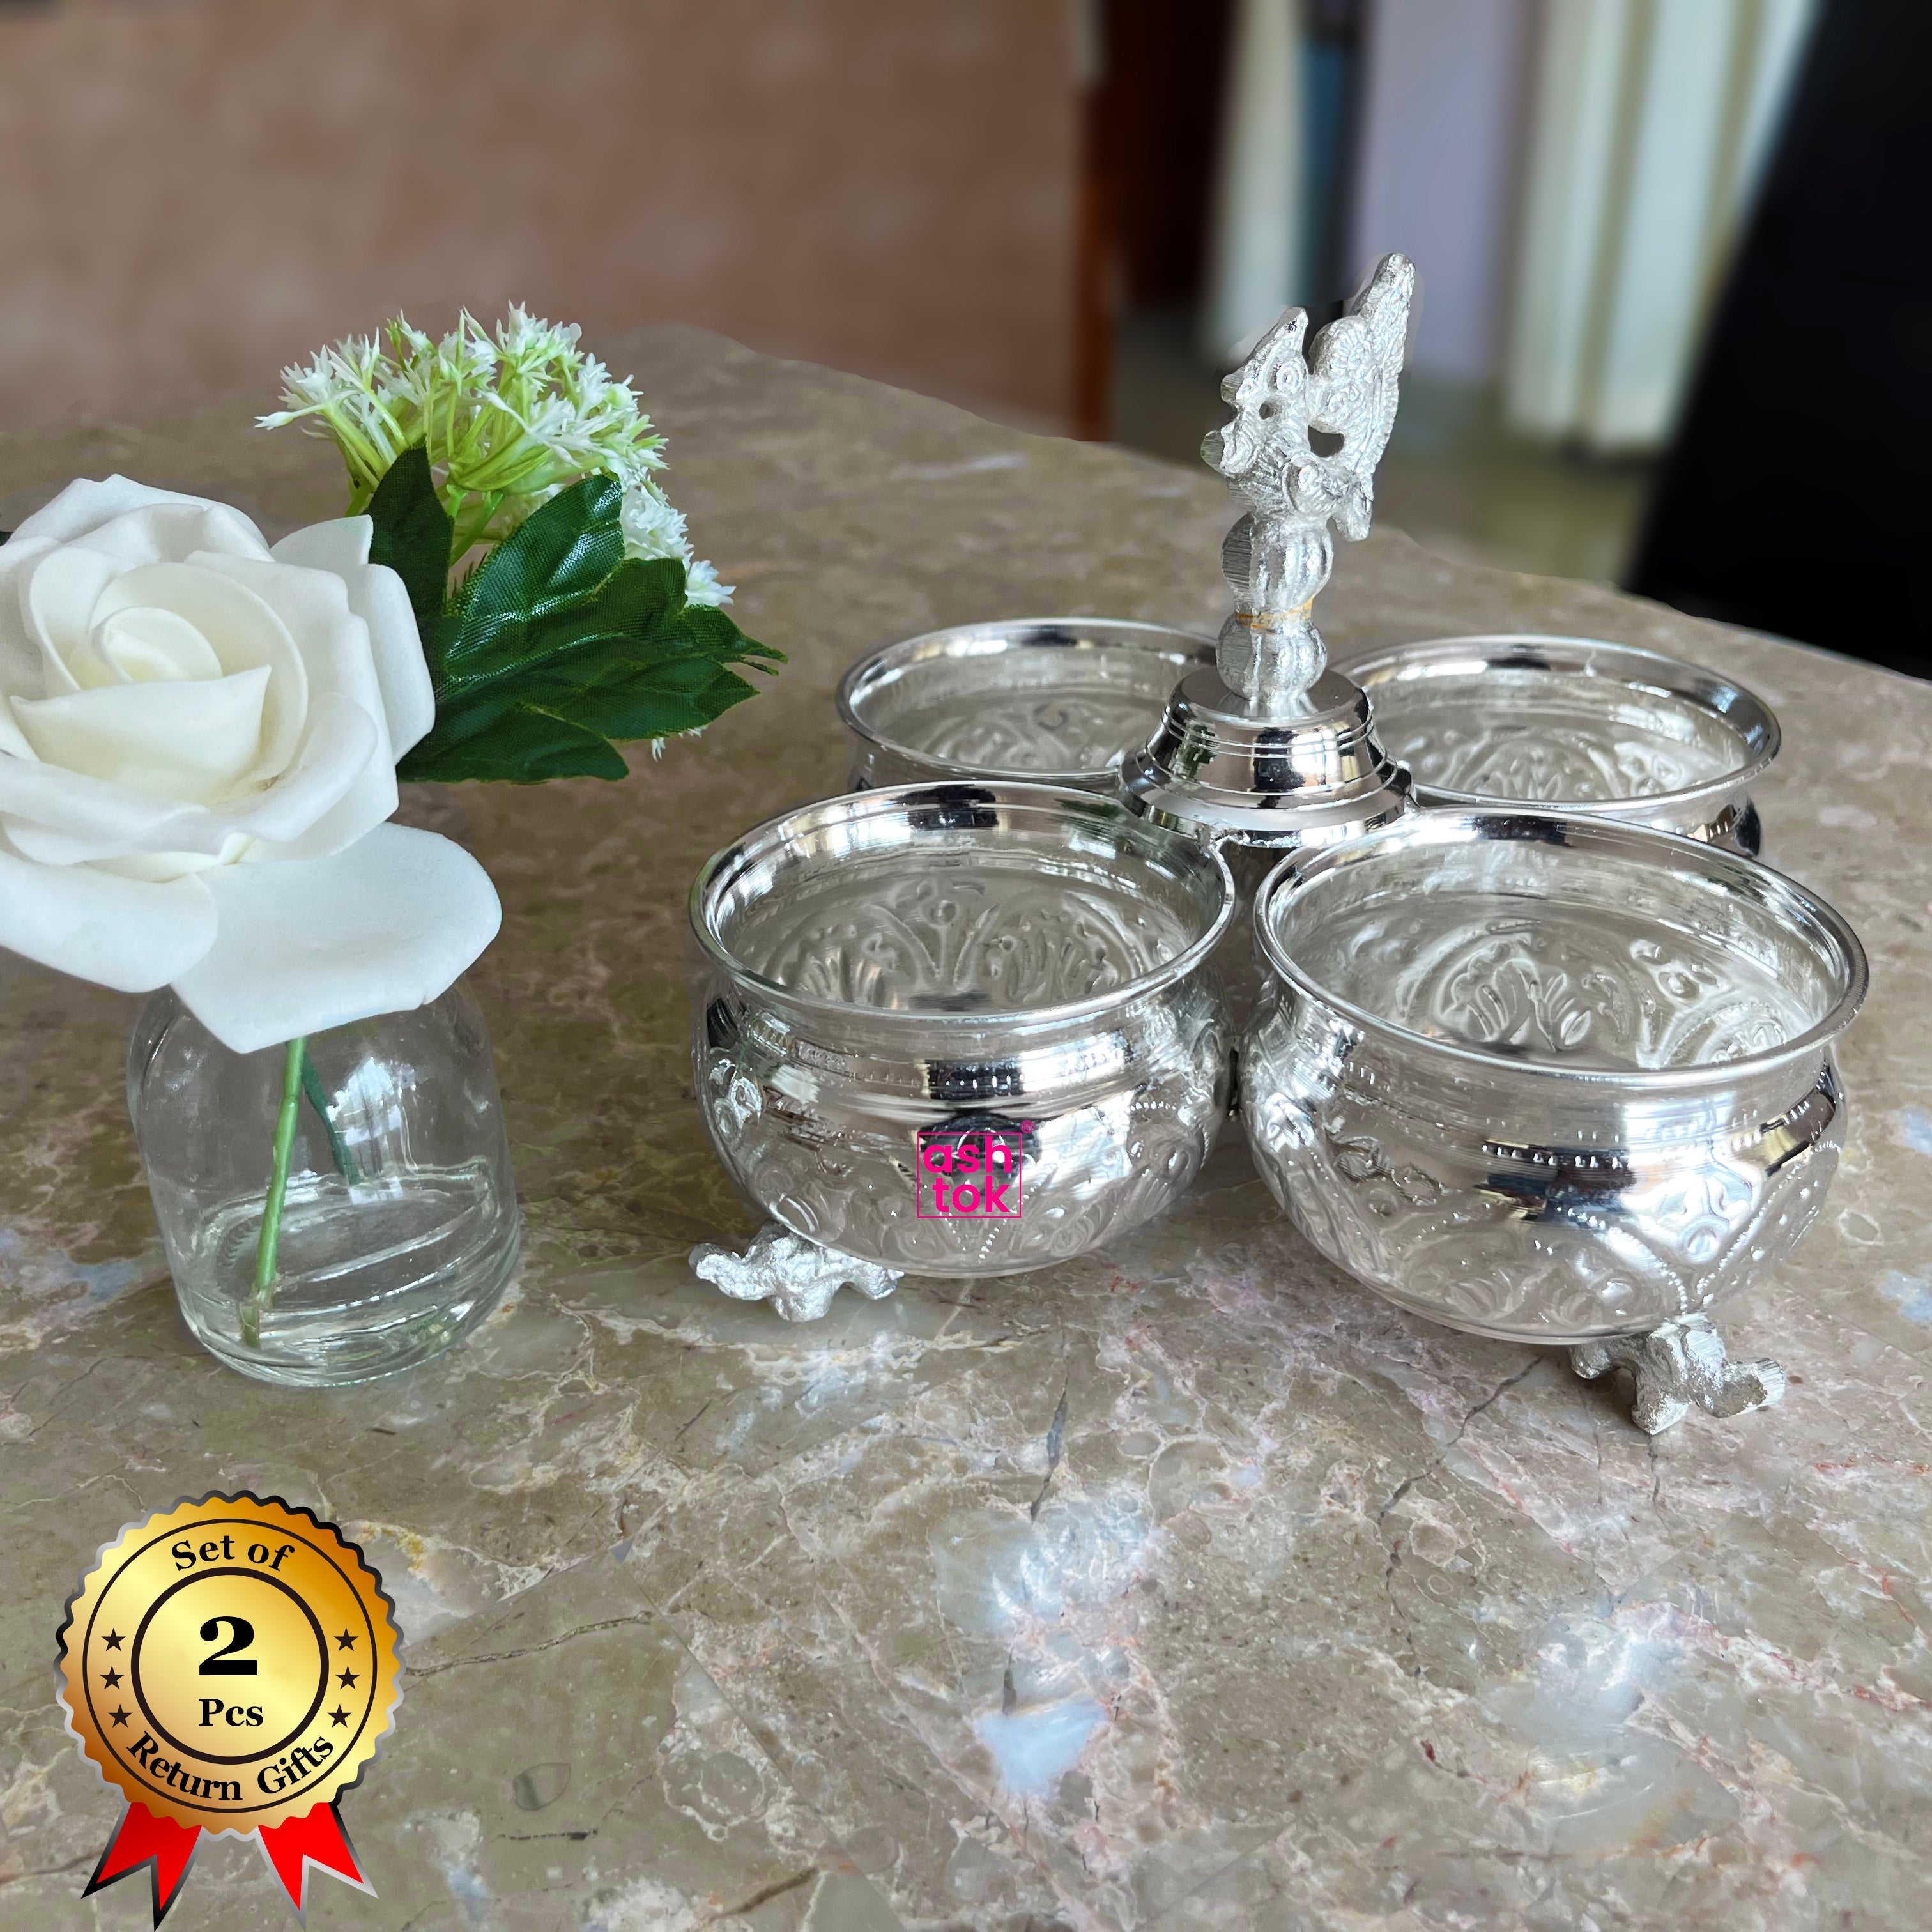 Buy German Silver Hand Engraved Peacock Samai Pair / Diya Stand Pair for  Decoration & Gifts - Pack of 2 (Size - 21 x 7 Inch) Online at Low Prices in  India - Amazon.in